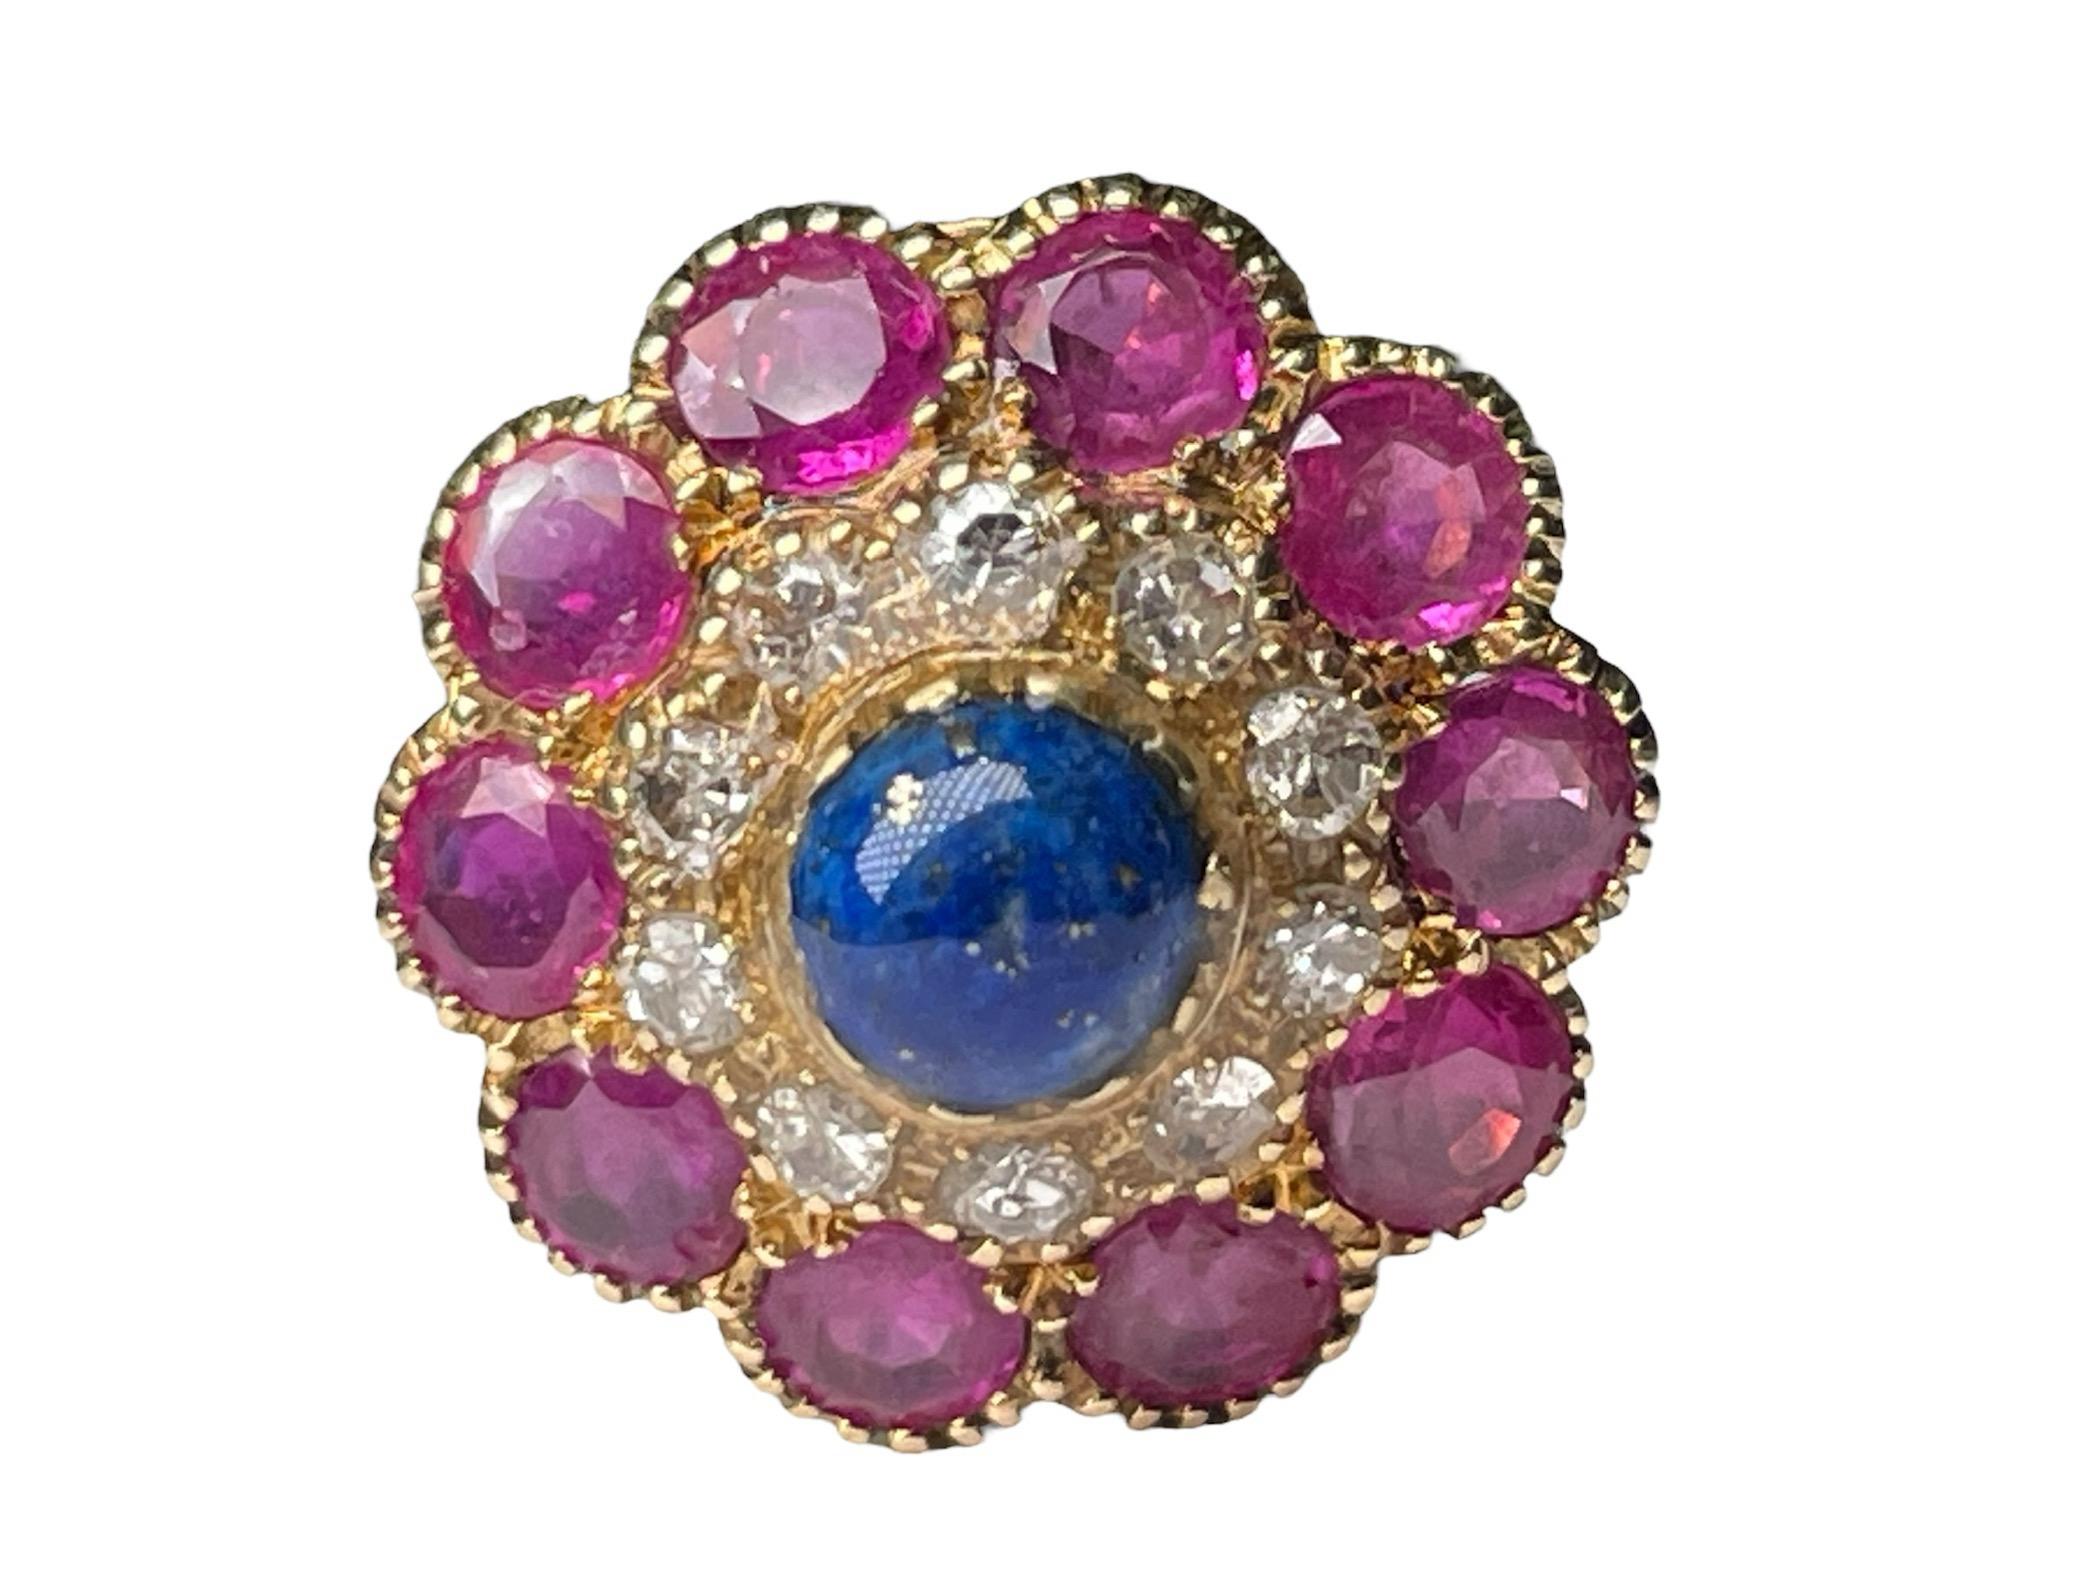 18k Yellow Gold Diamonds, Lapis Lazuli and Rubies Cocktail Ring In Good Condition For Sale In Guaynabo, PR